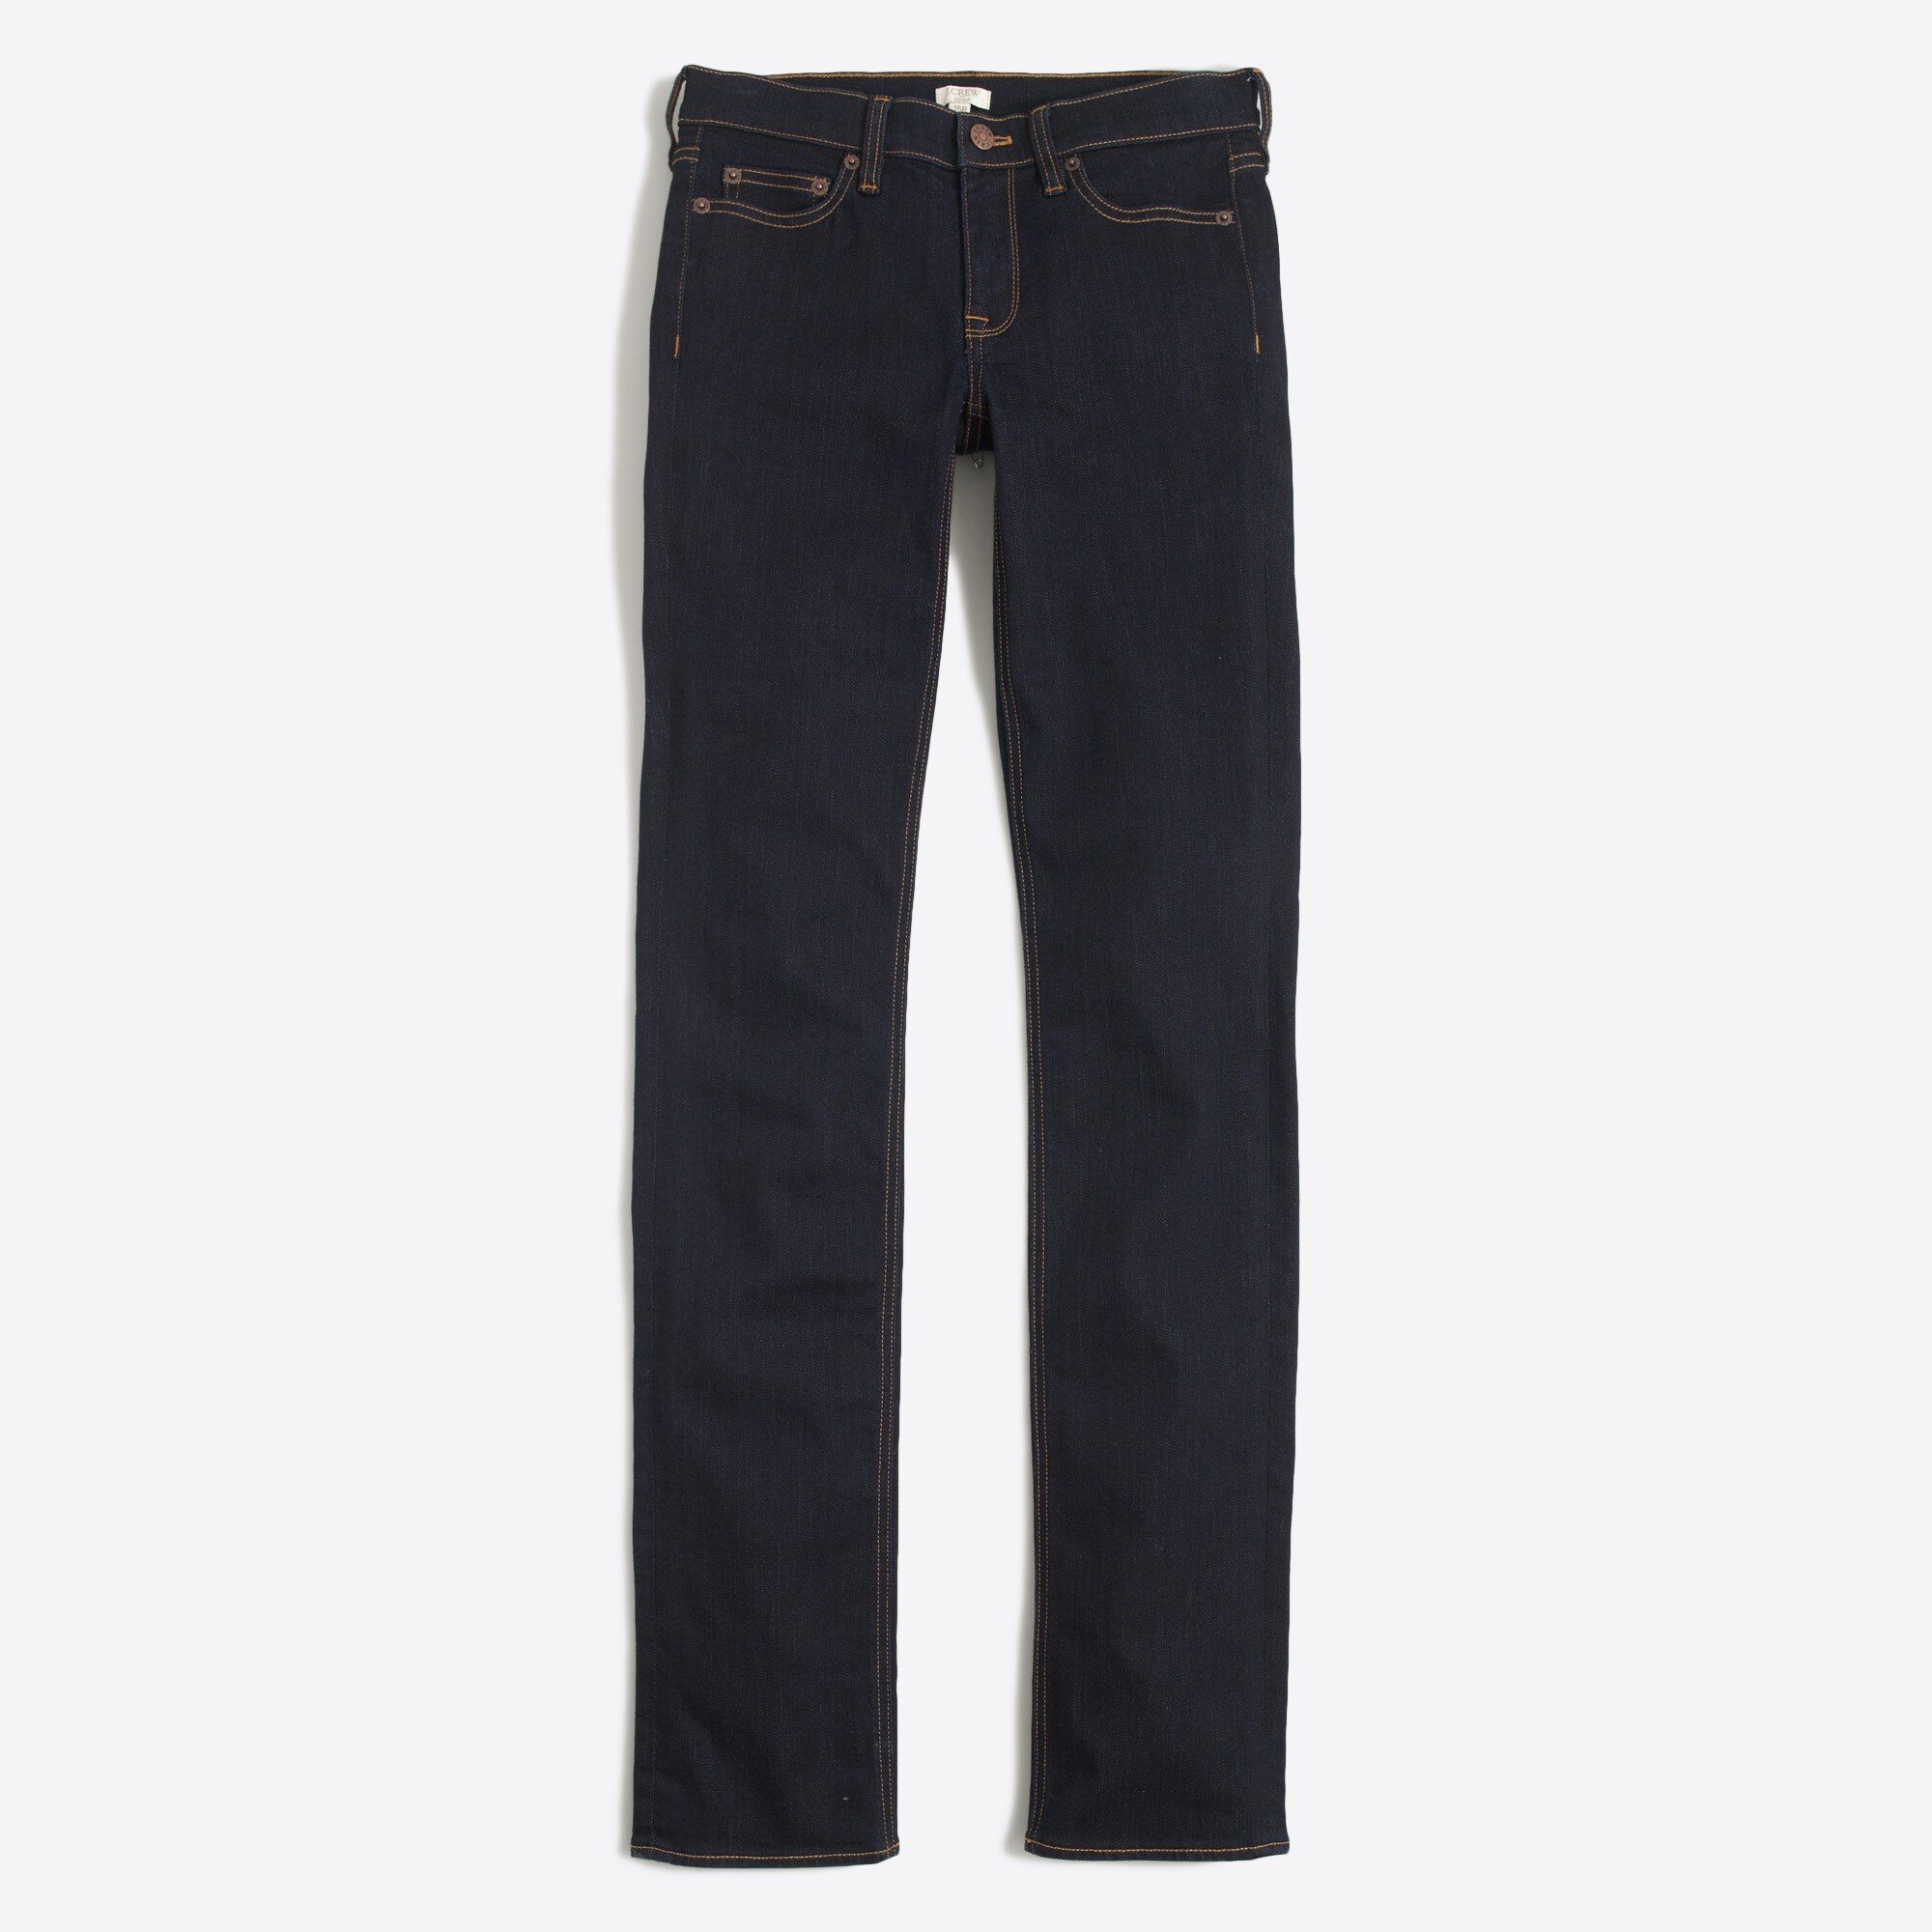 Rinse wash straight and narrow jean with 29" inseam